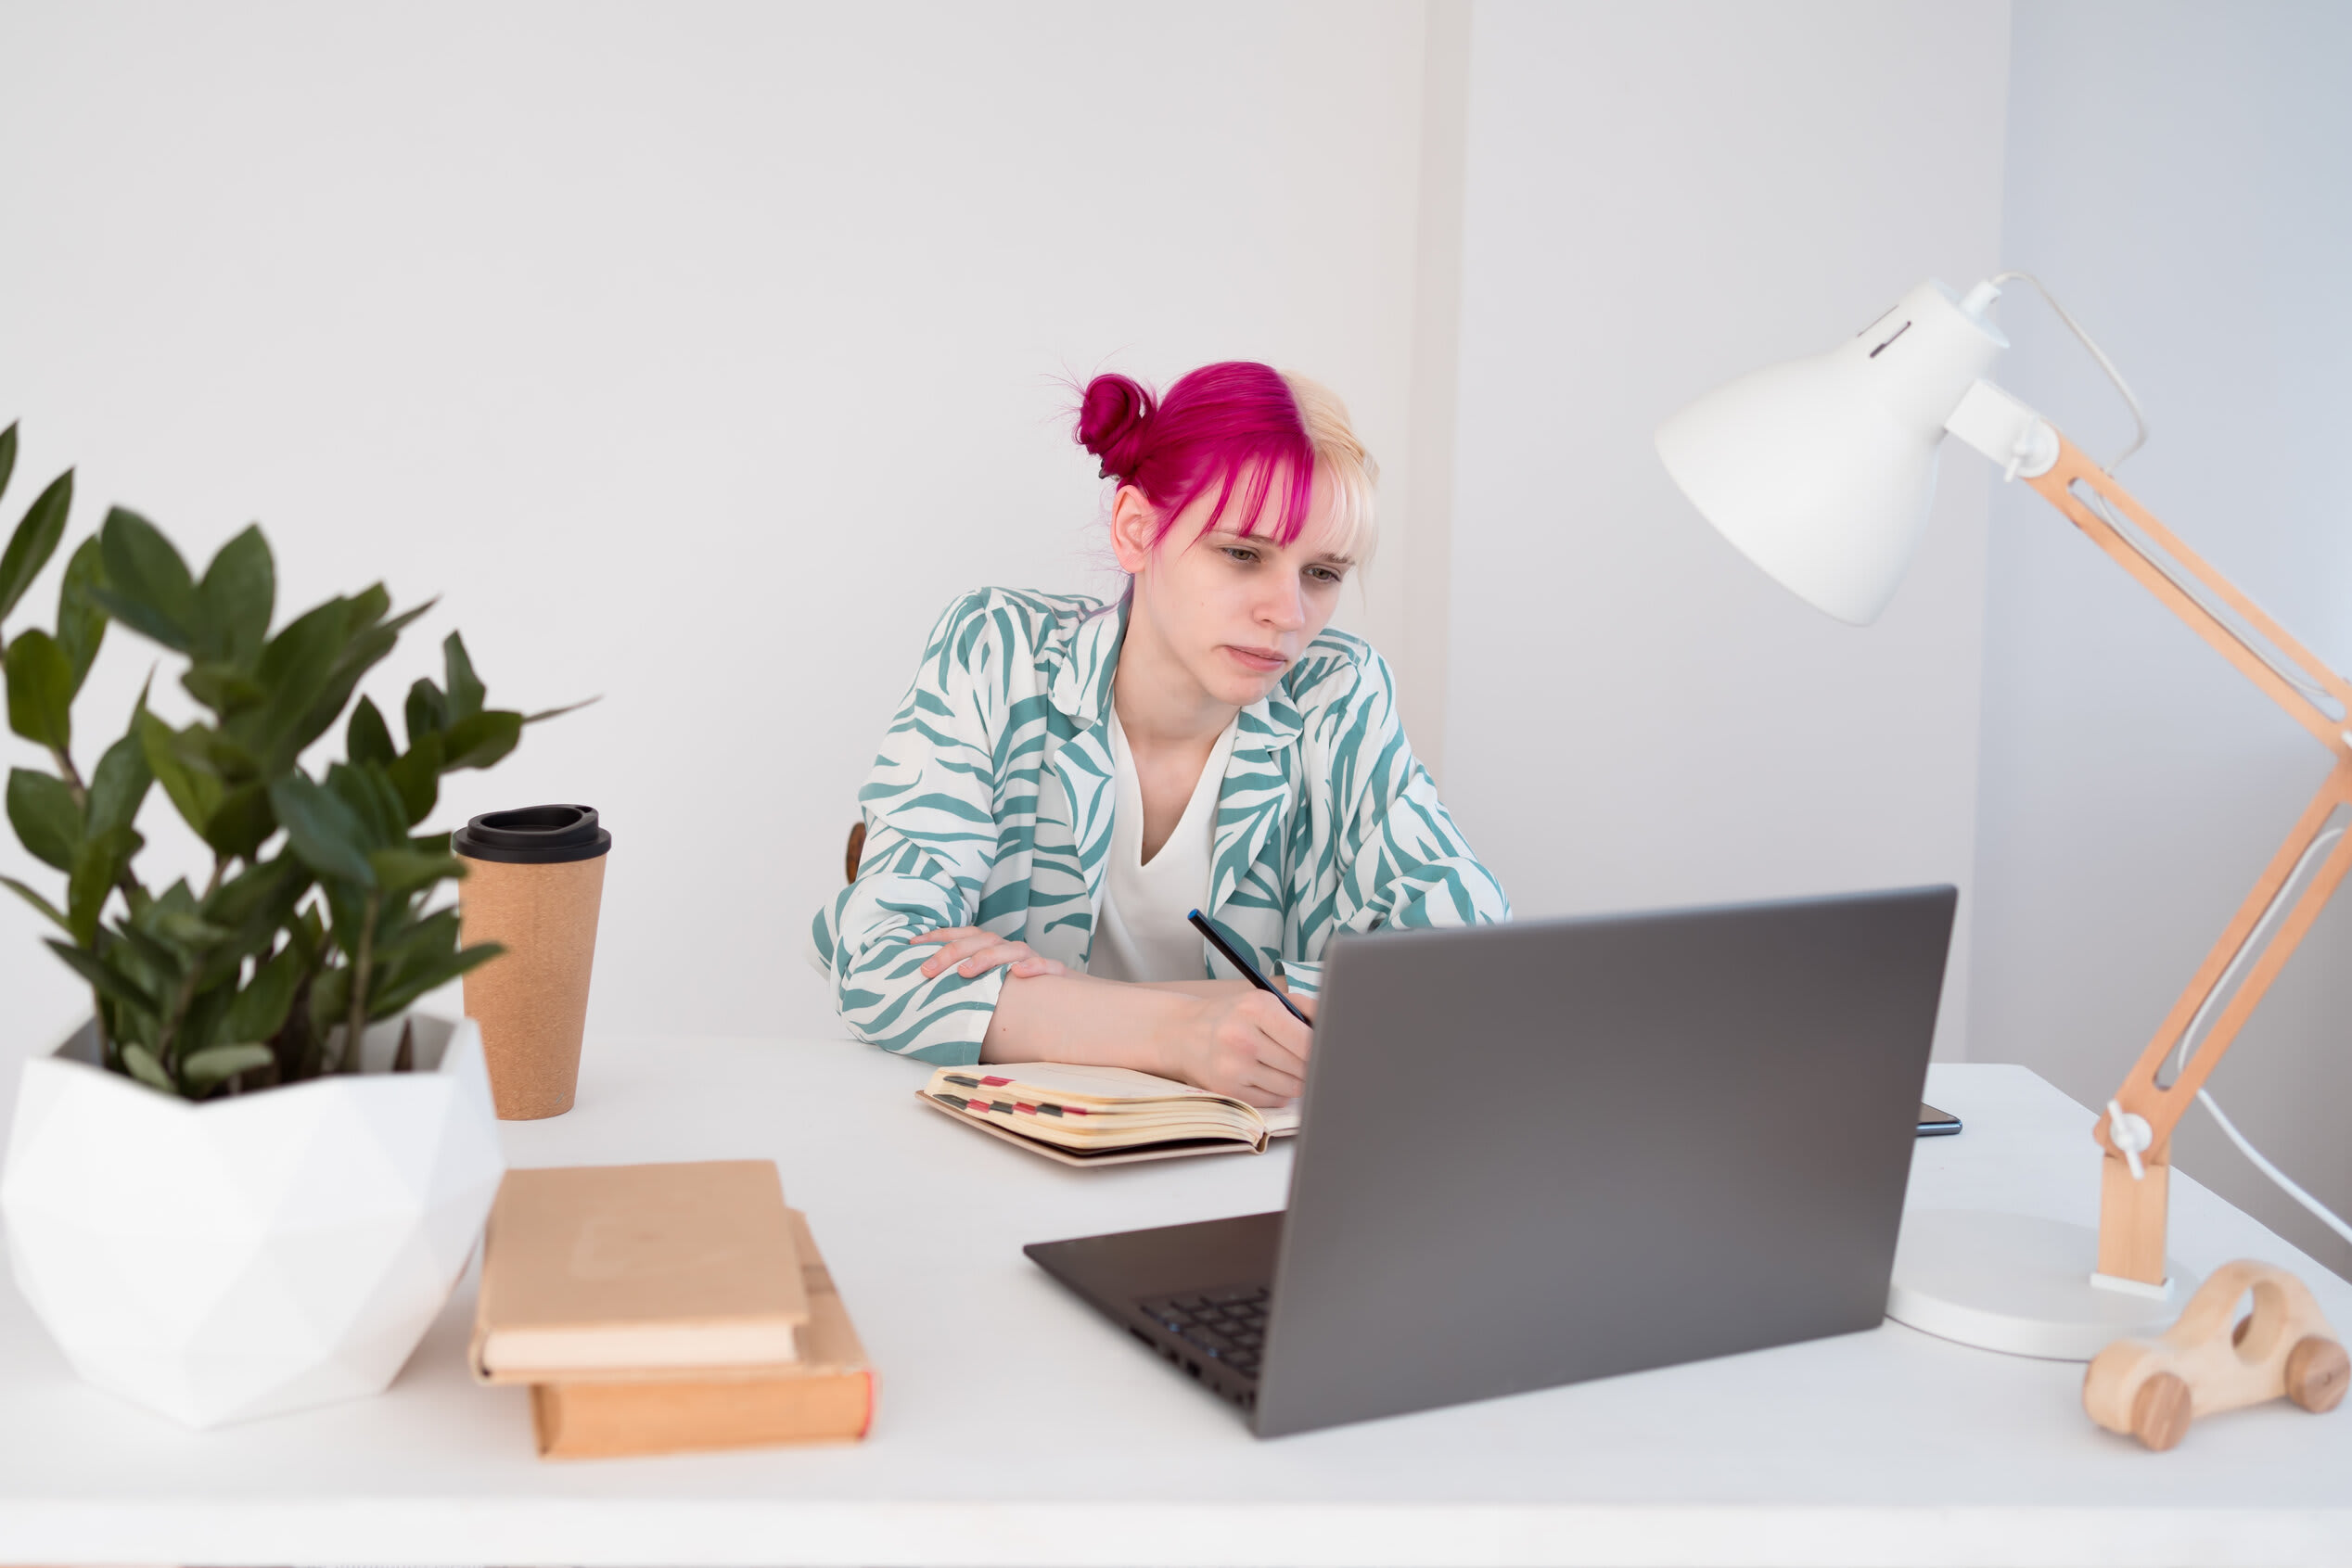 Female student with pink and white hair studying online